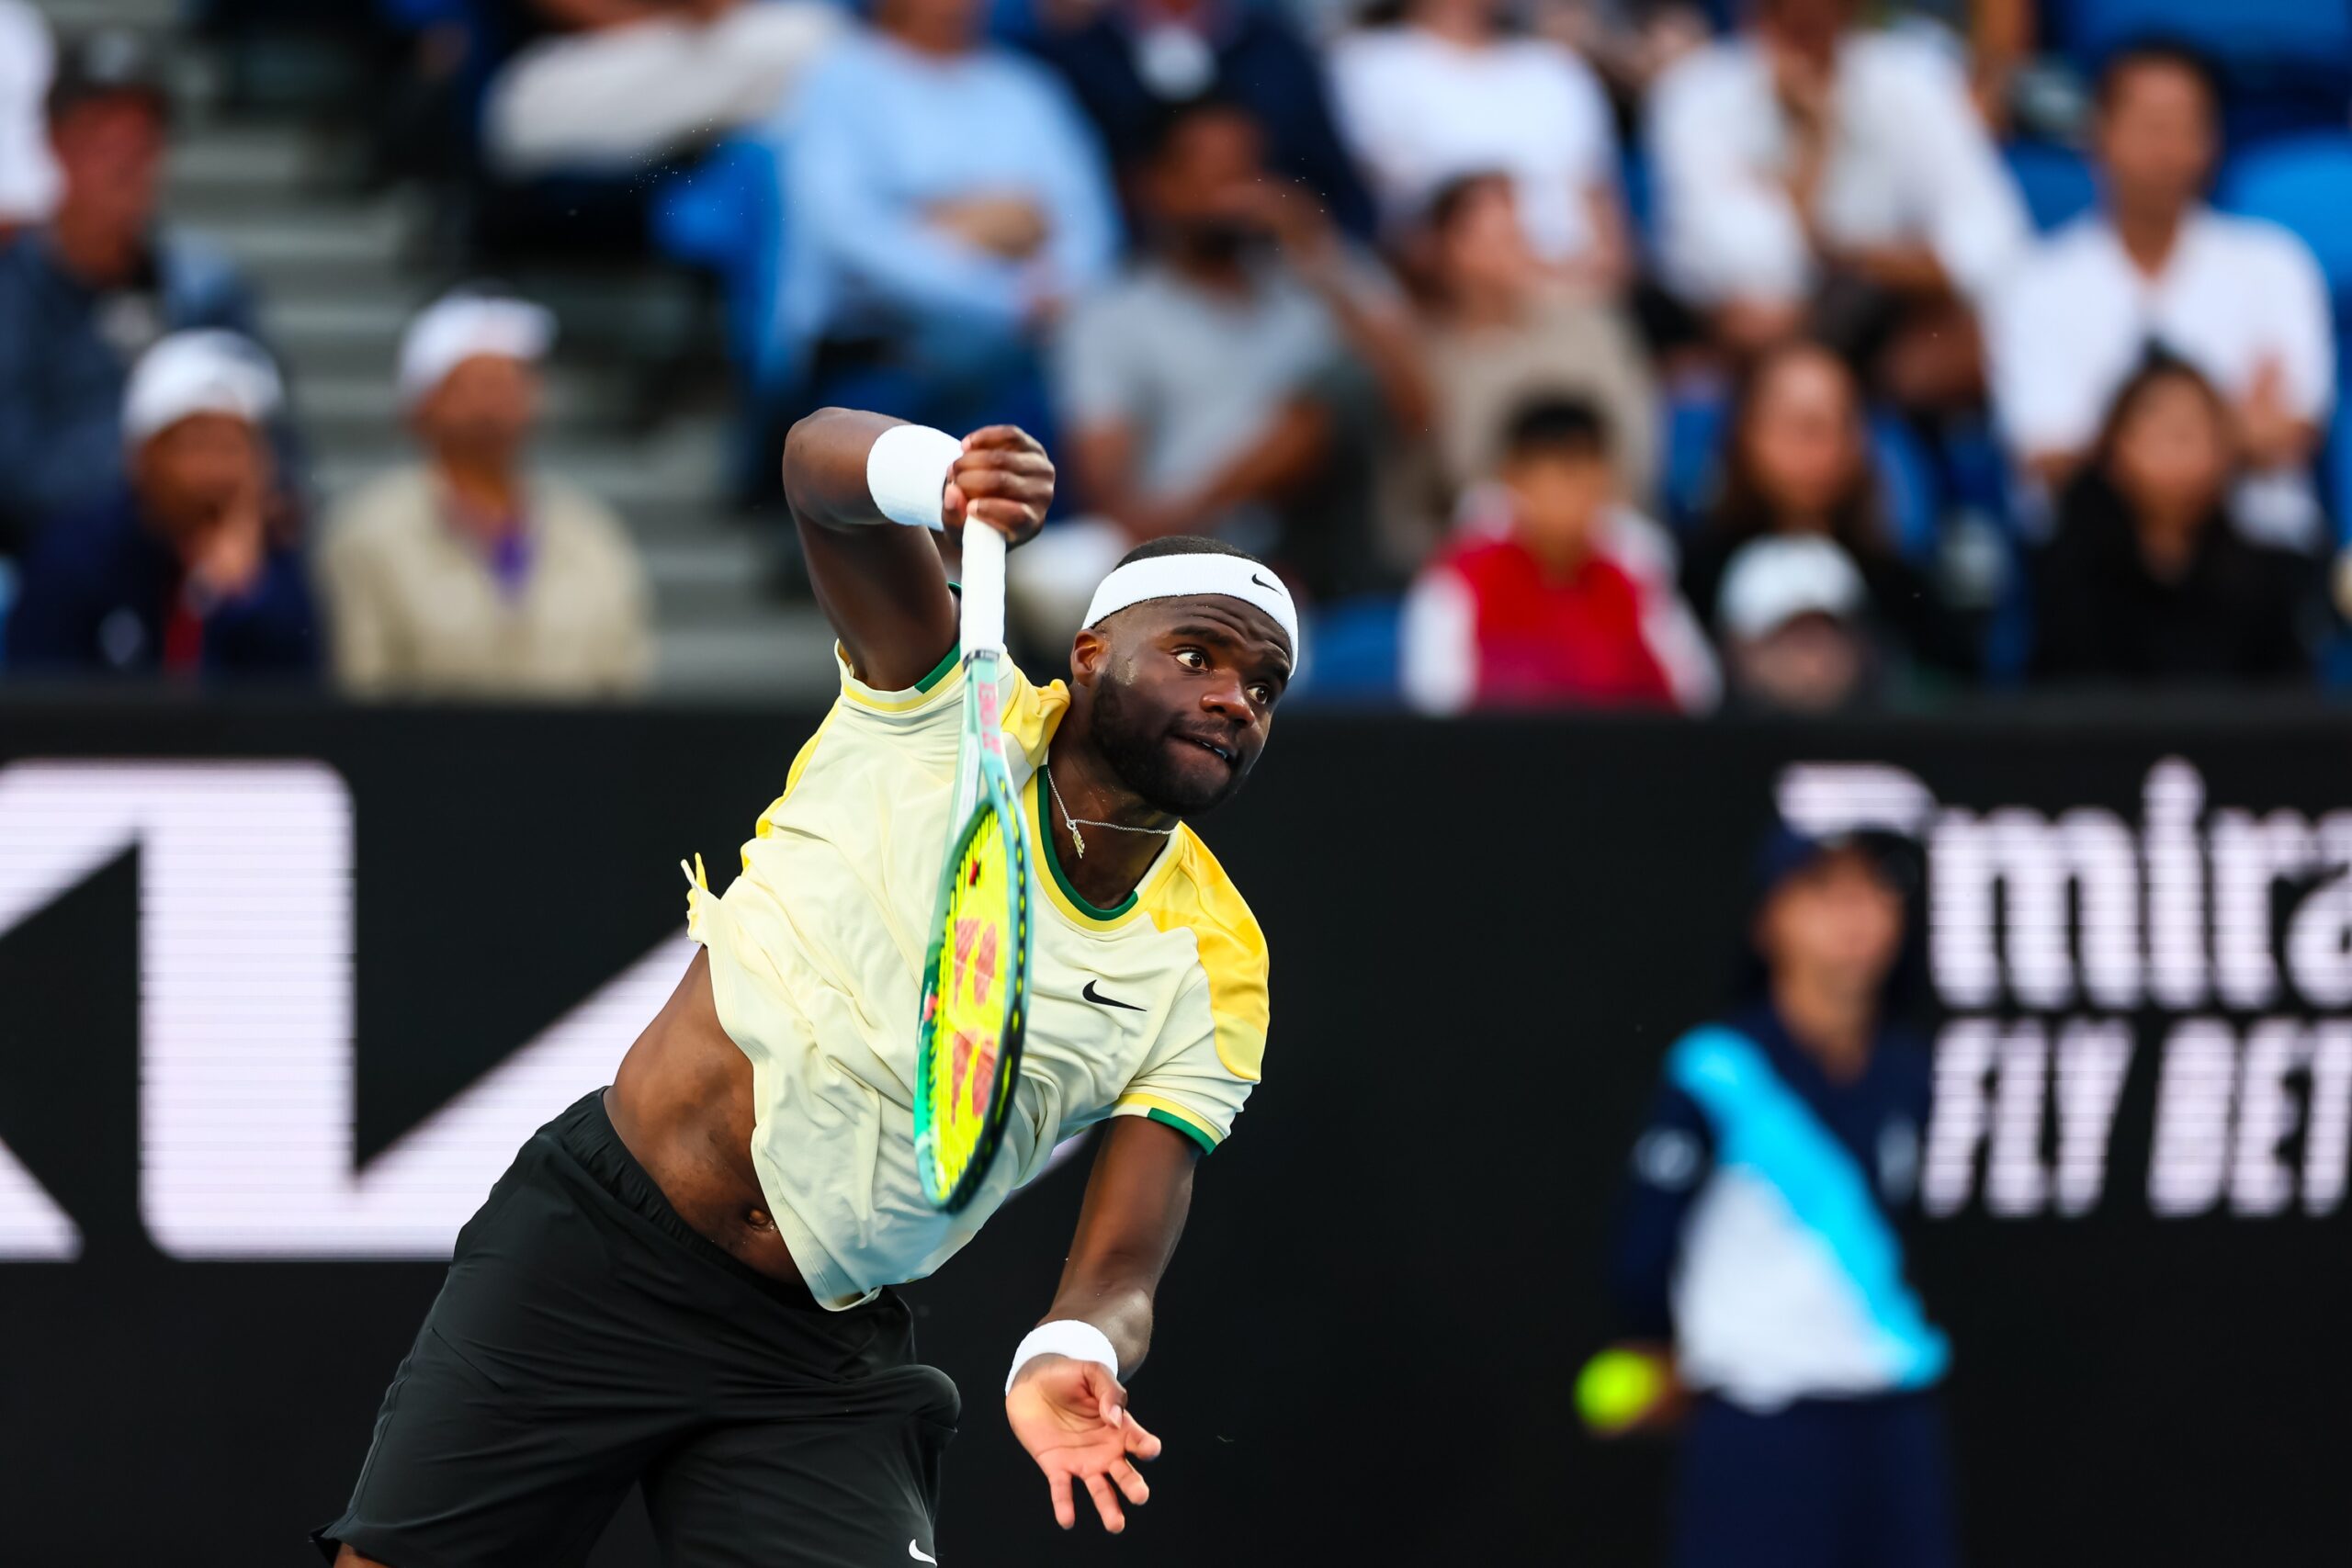 Frances Tiafoe in action ahead of the ATP Delray Beach Open.